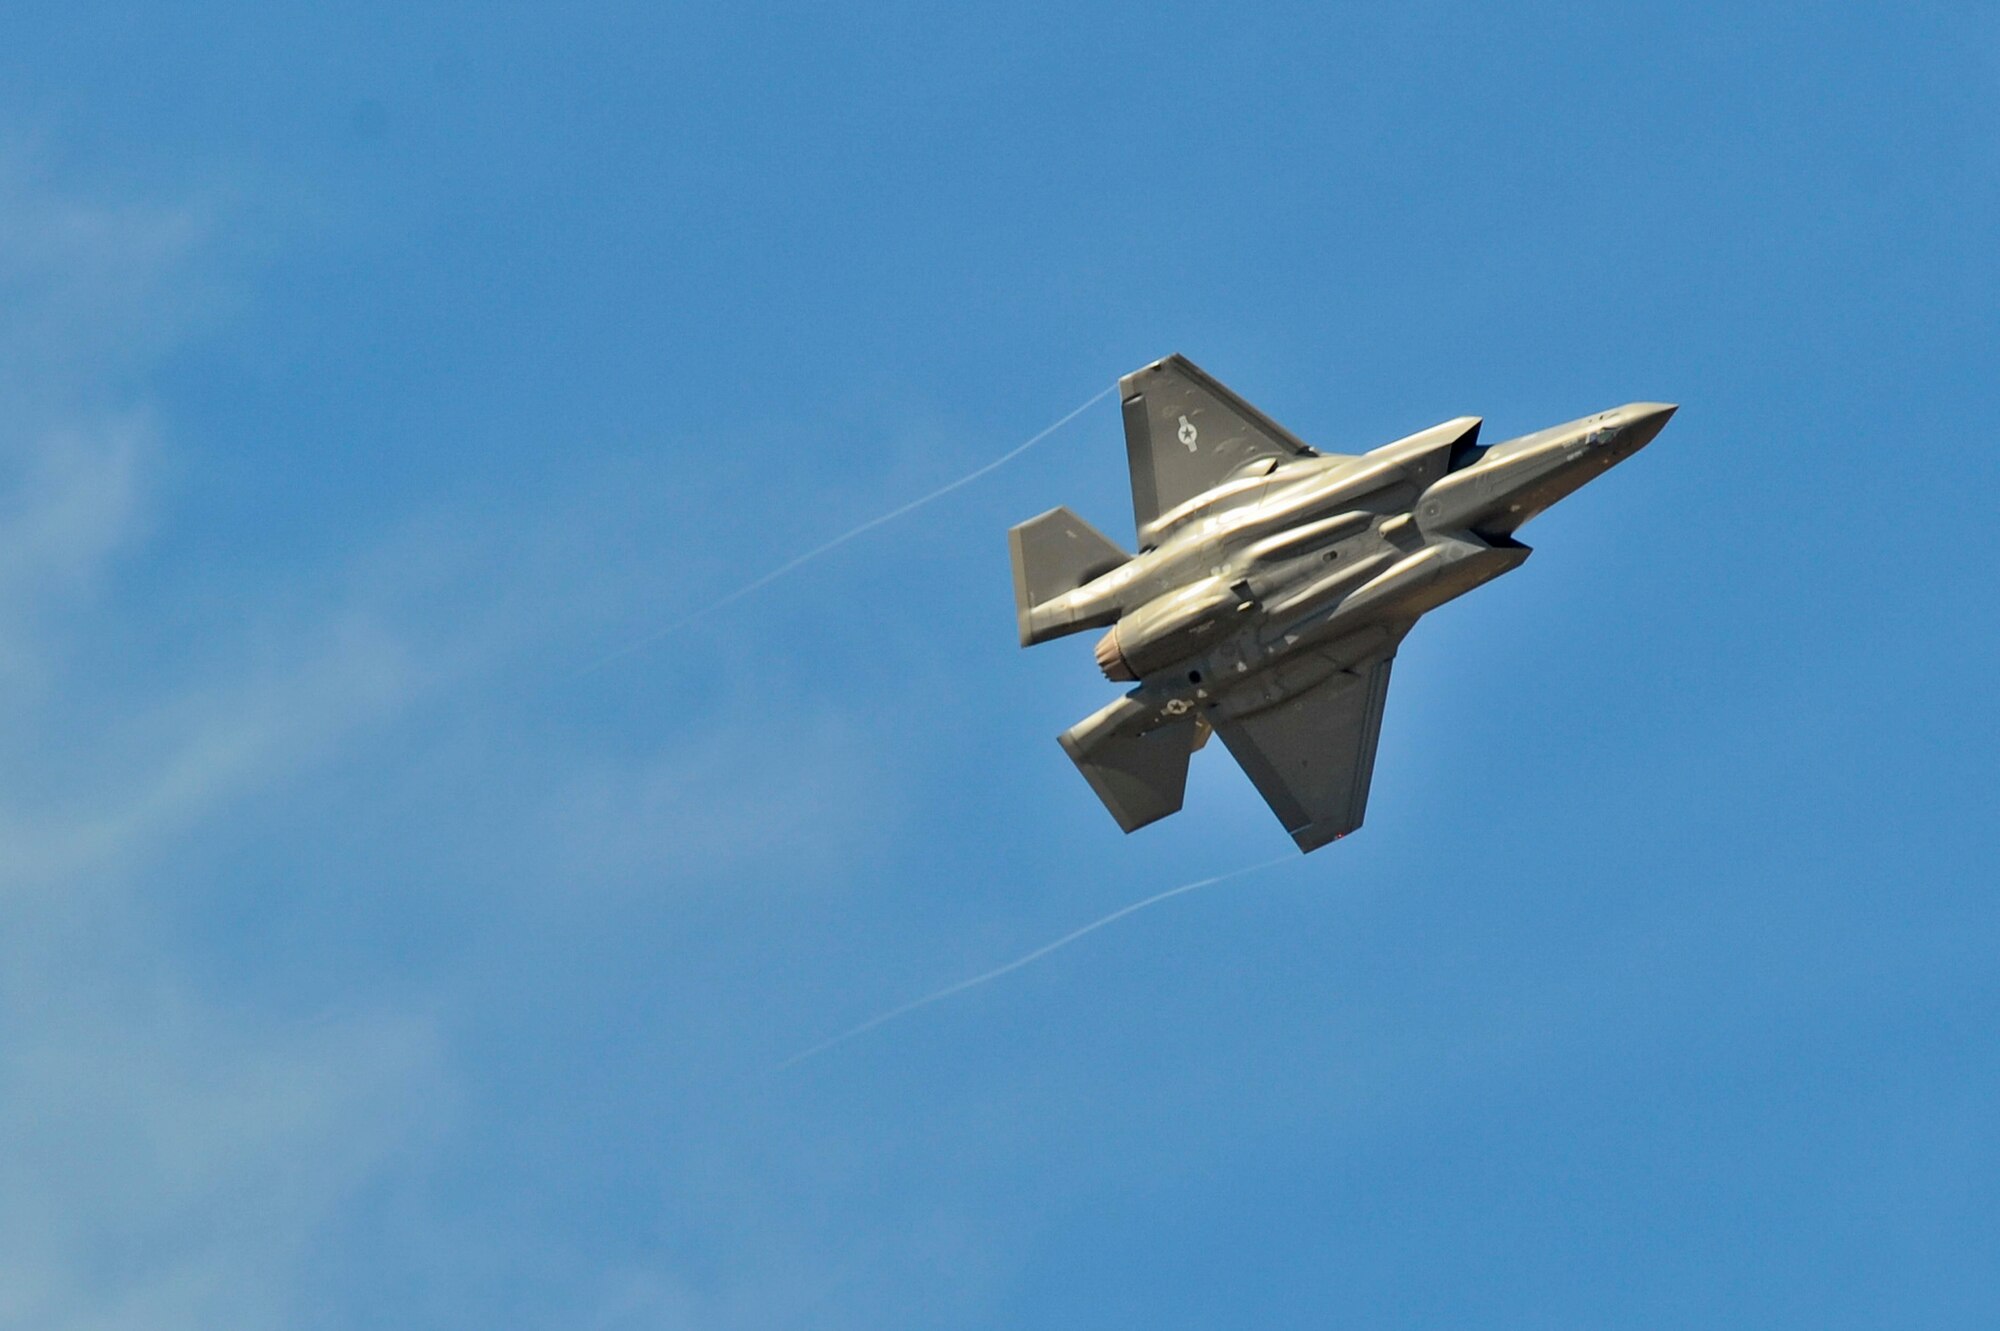 Luke’s first F-35 Lightning II flies overhead before it lands on base for the first time on March 10. The jet is the first of 144 F-35s that will eventually be assigned to the base. (U.S. Air Force photo/Staff Sgt. Darlene Seltmann) 